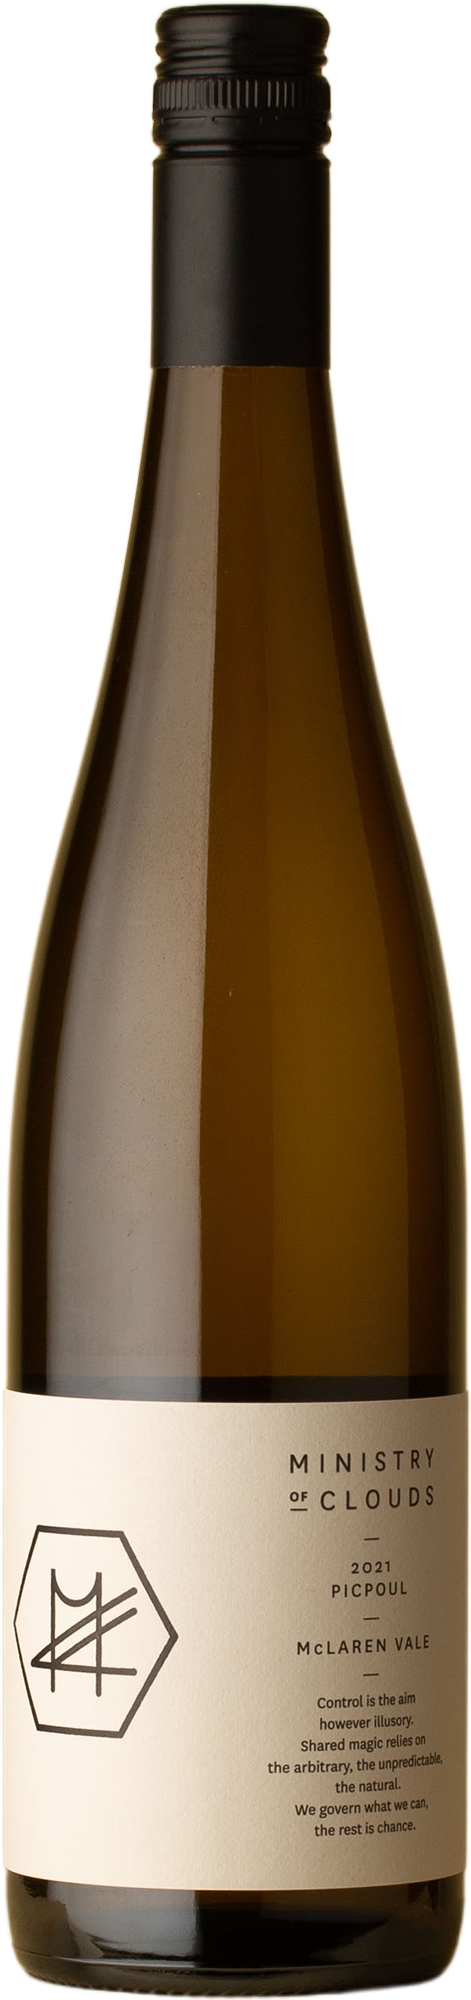 Ministry of Clouds - Picpoul Blanc 2021 White Wine